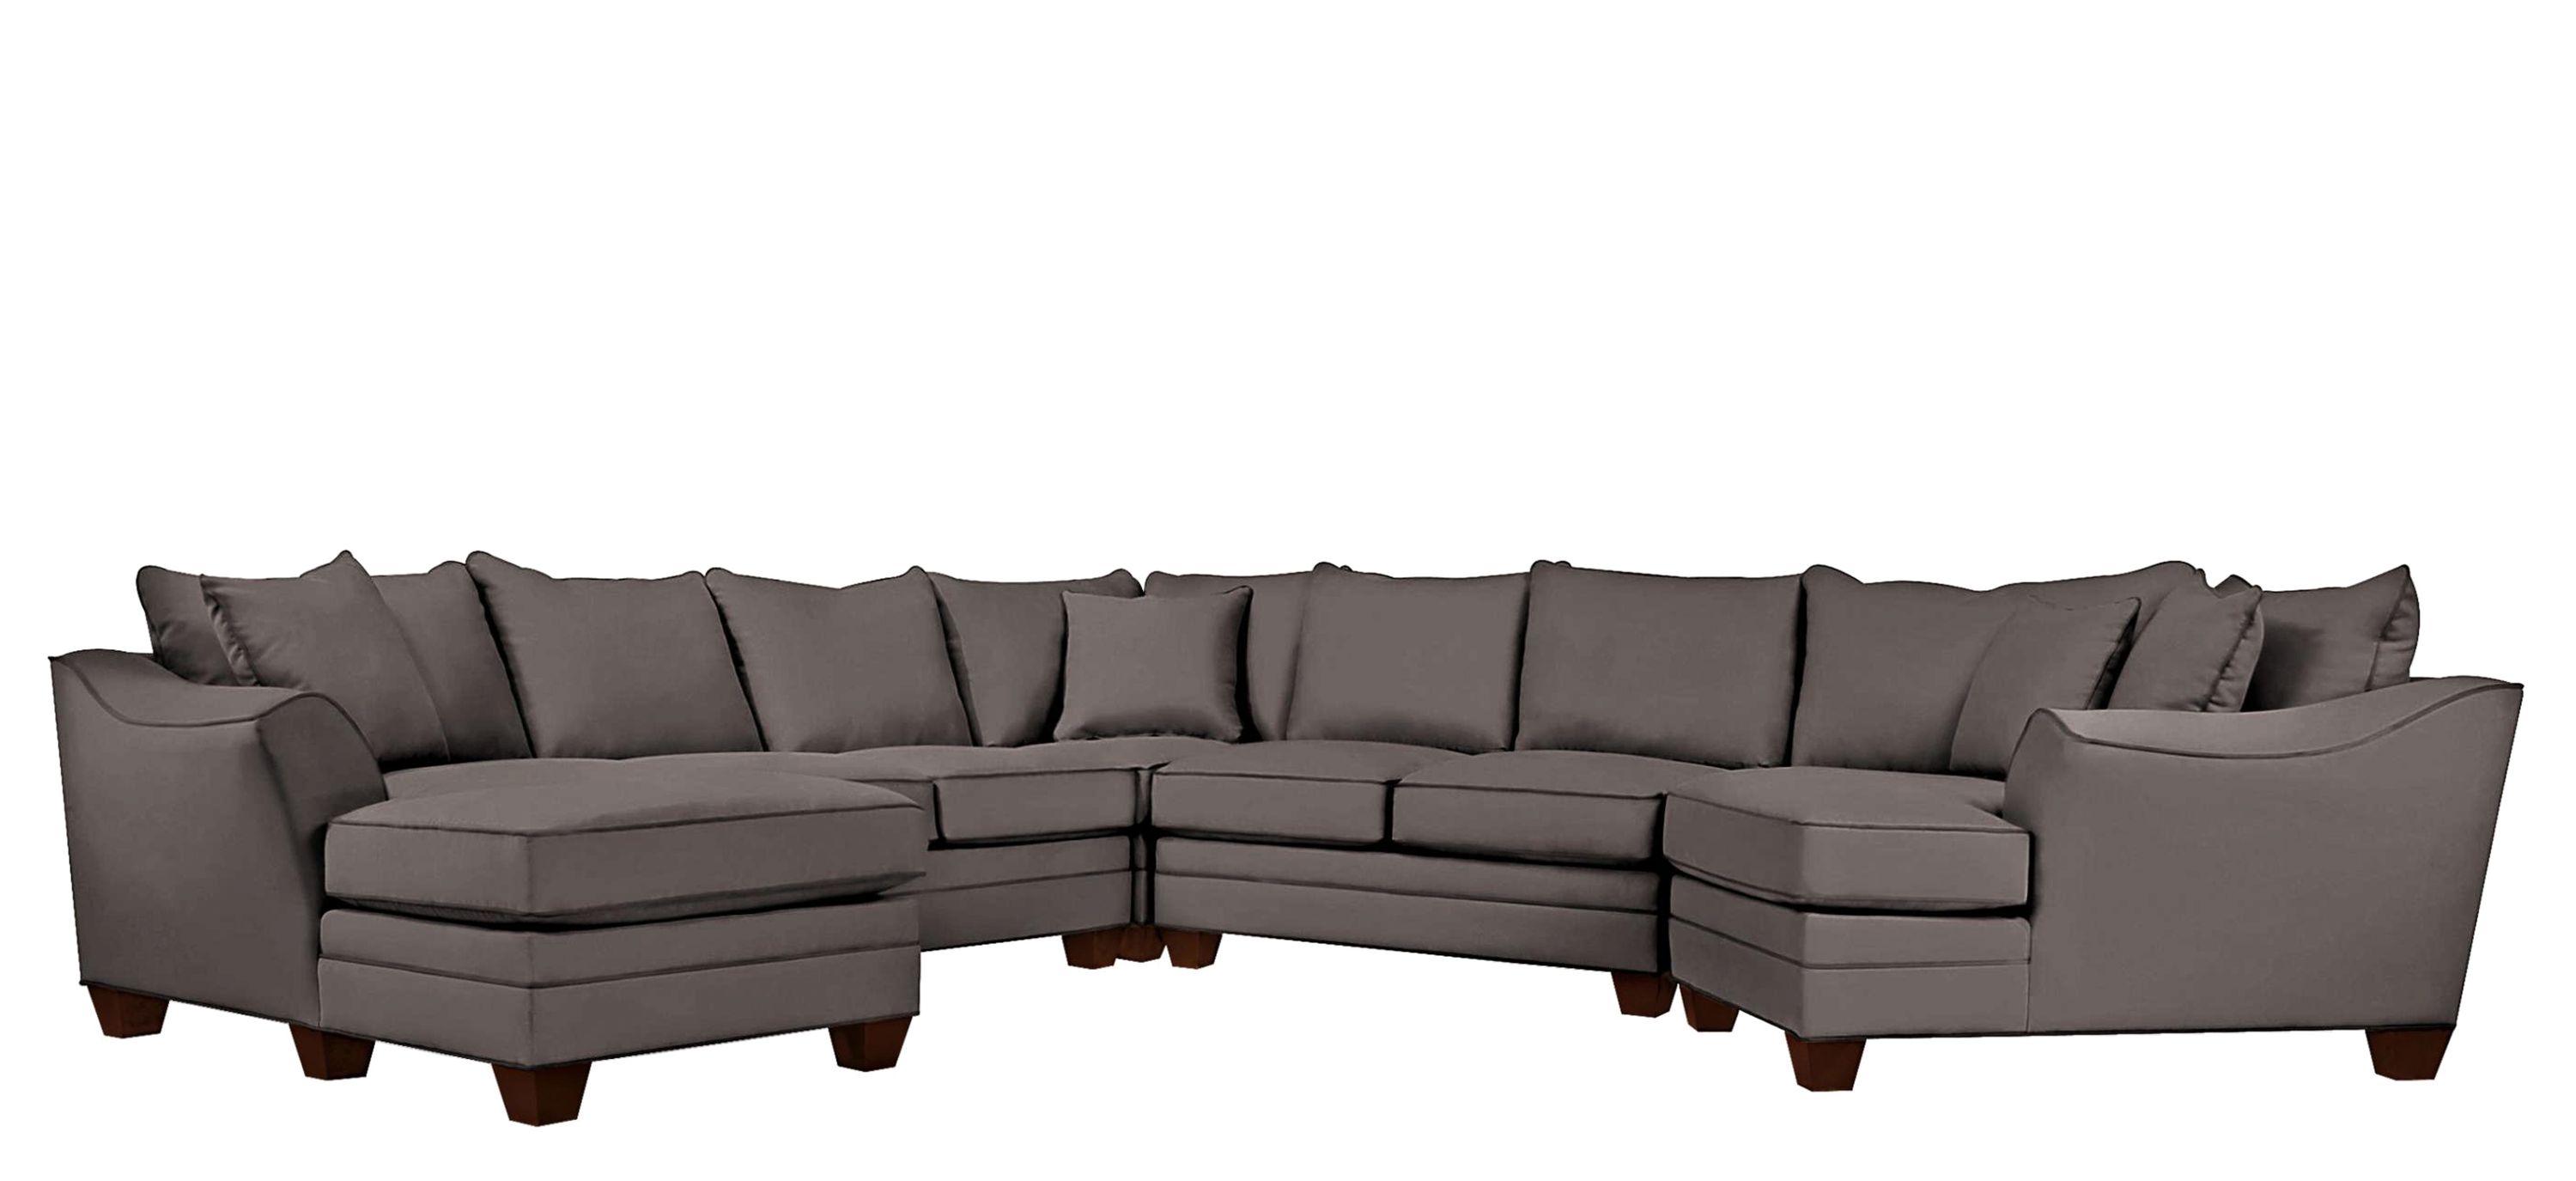 Foresthill 5-pc. Left Hand Facing Microfiber Sectional Sofa